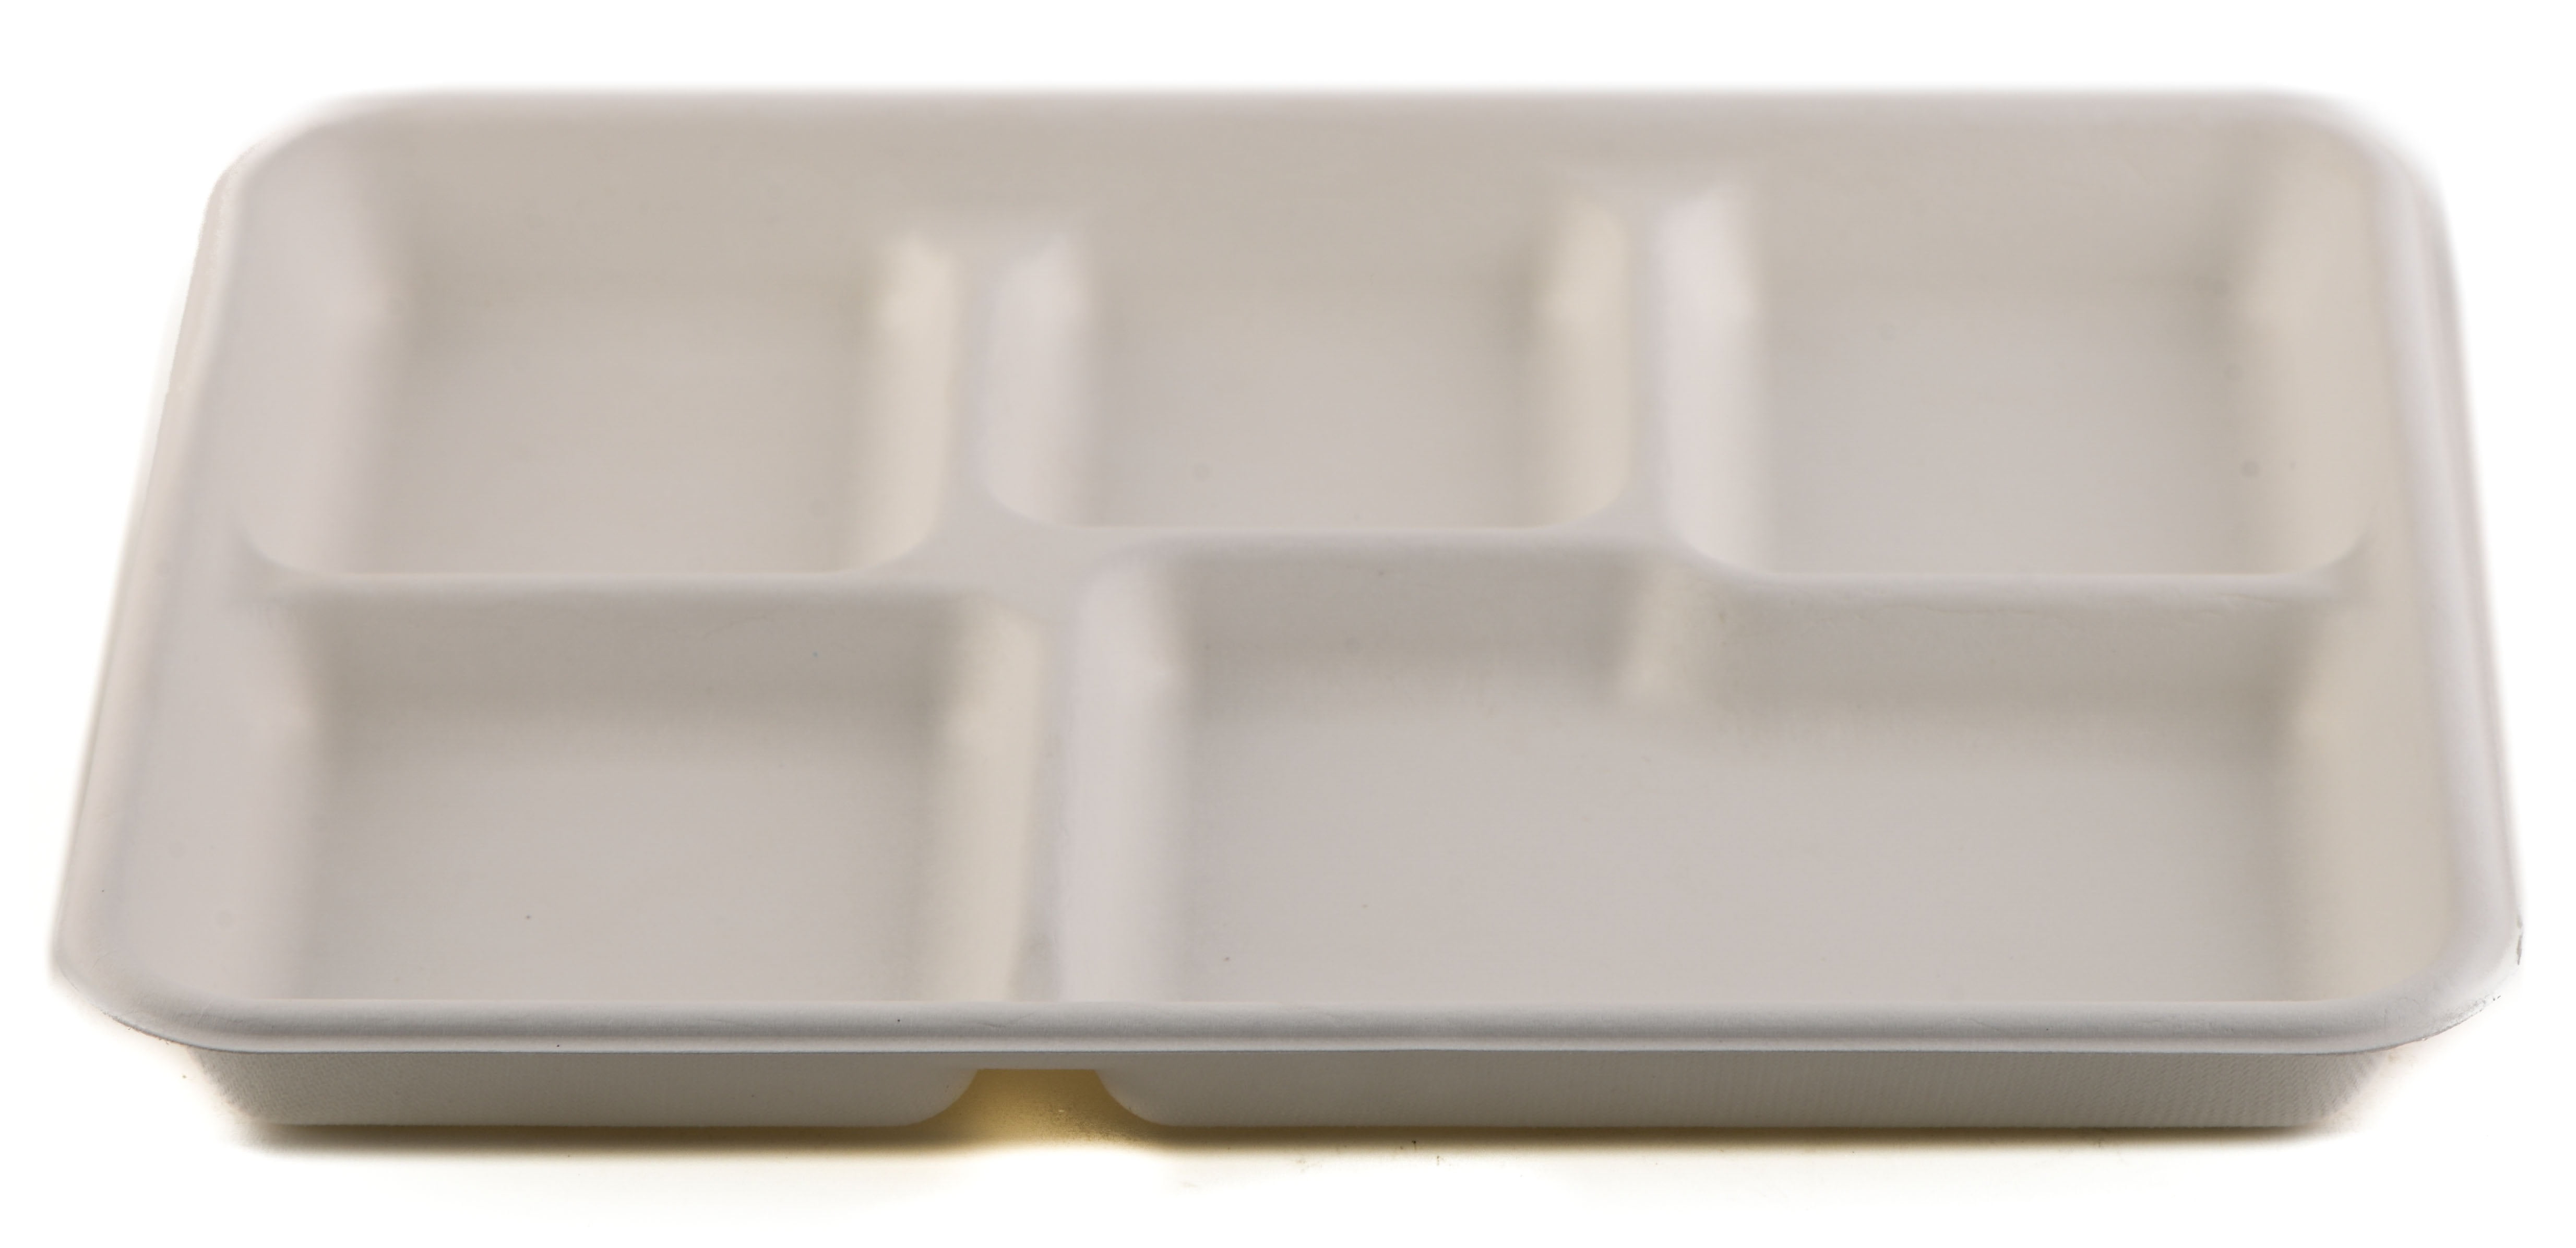 Transparent Food Grade Plastic Lunch Tray-Meal Tray-Disposable